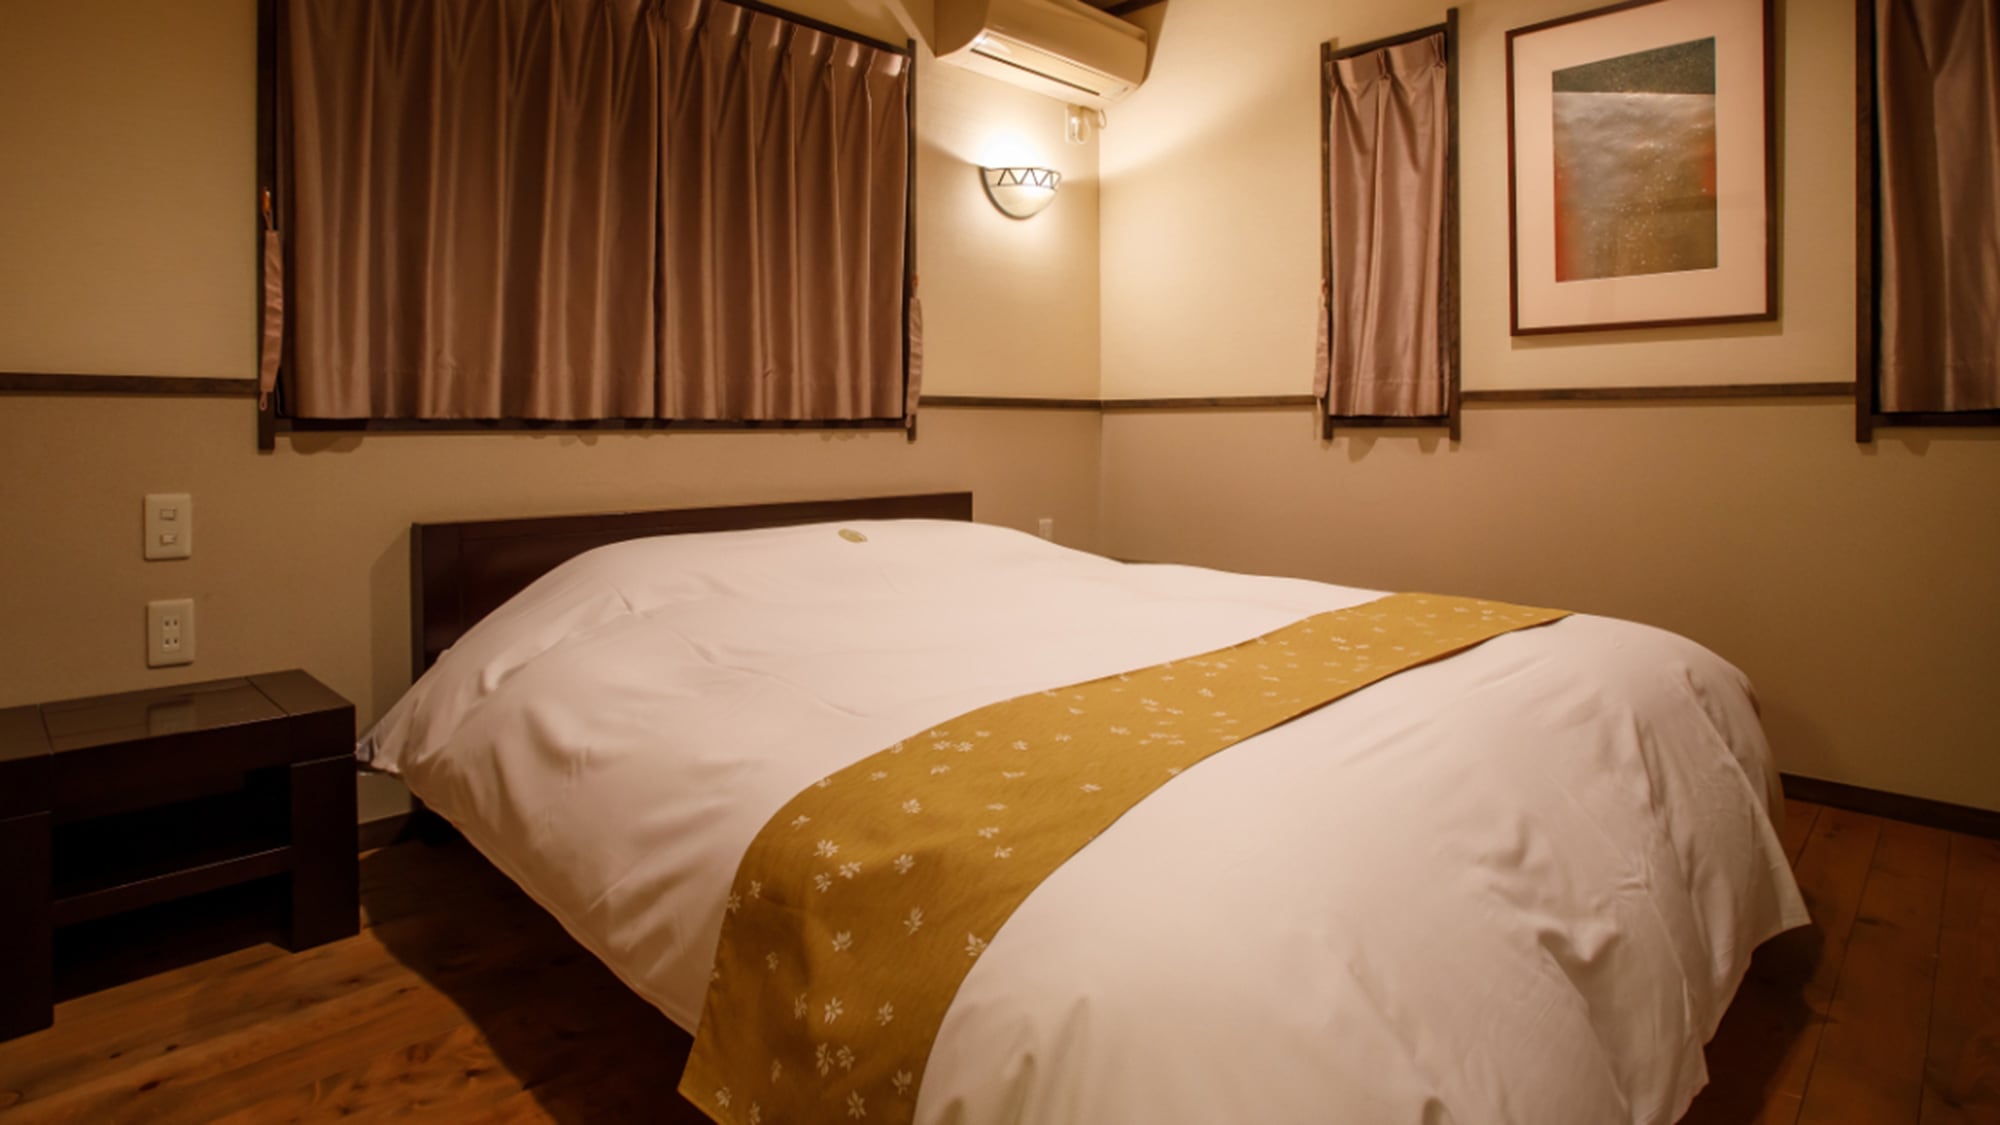 Separate guest room Double bed is a popular room